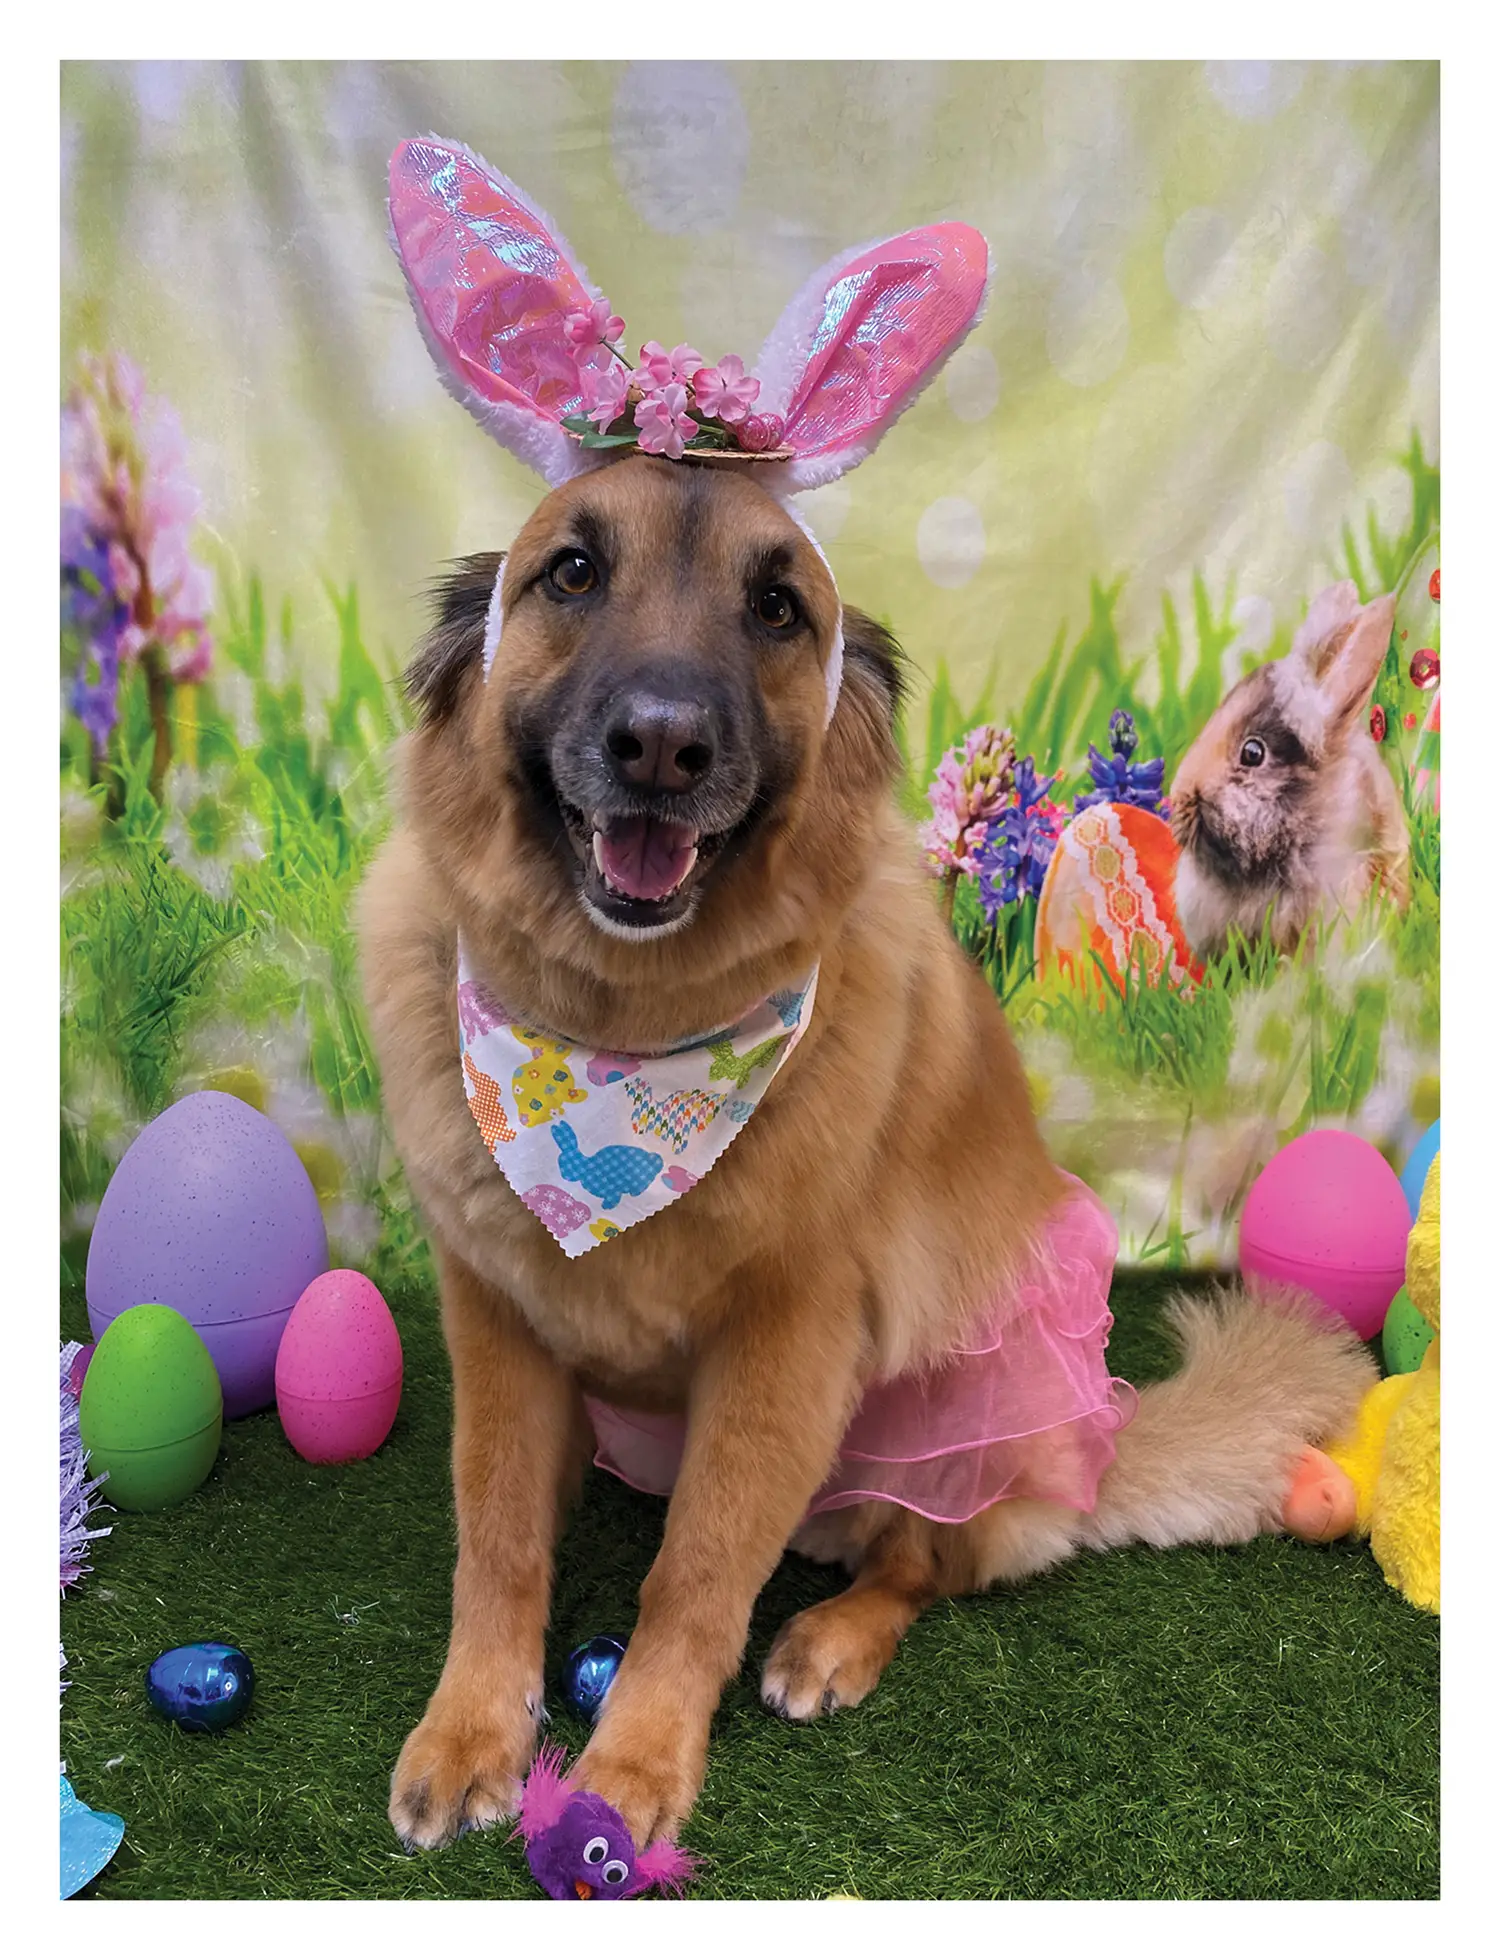 Bella with bunny ears on for easter photos